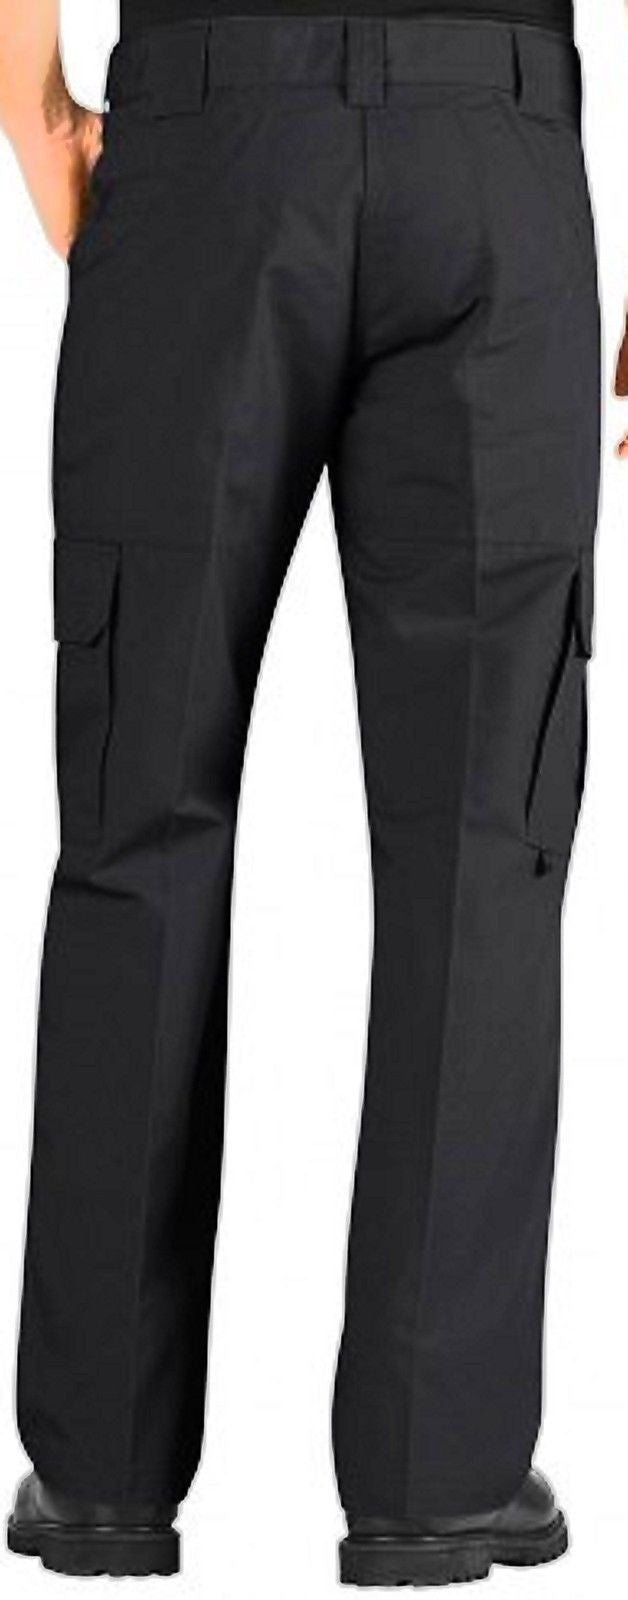 Dickies Men's Lightweight Relaxed Fit Straight Leg Ripstop Tactical Duty Pants